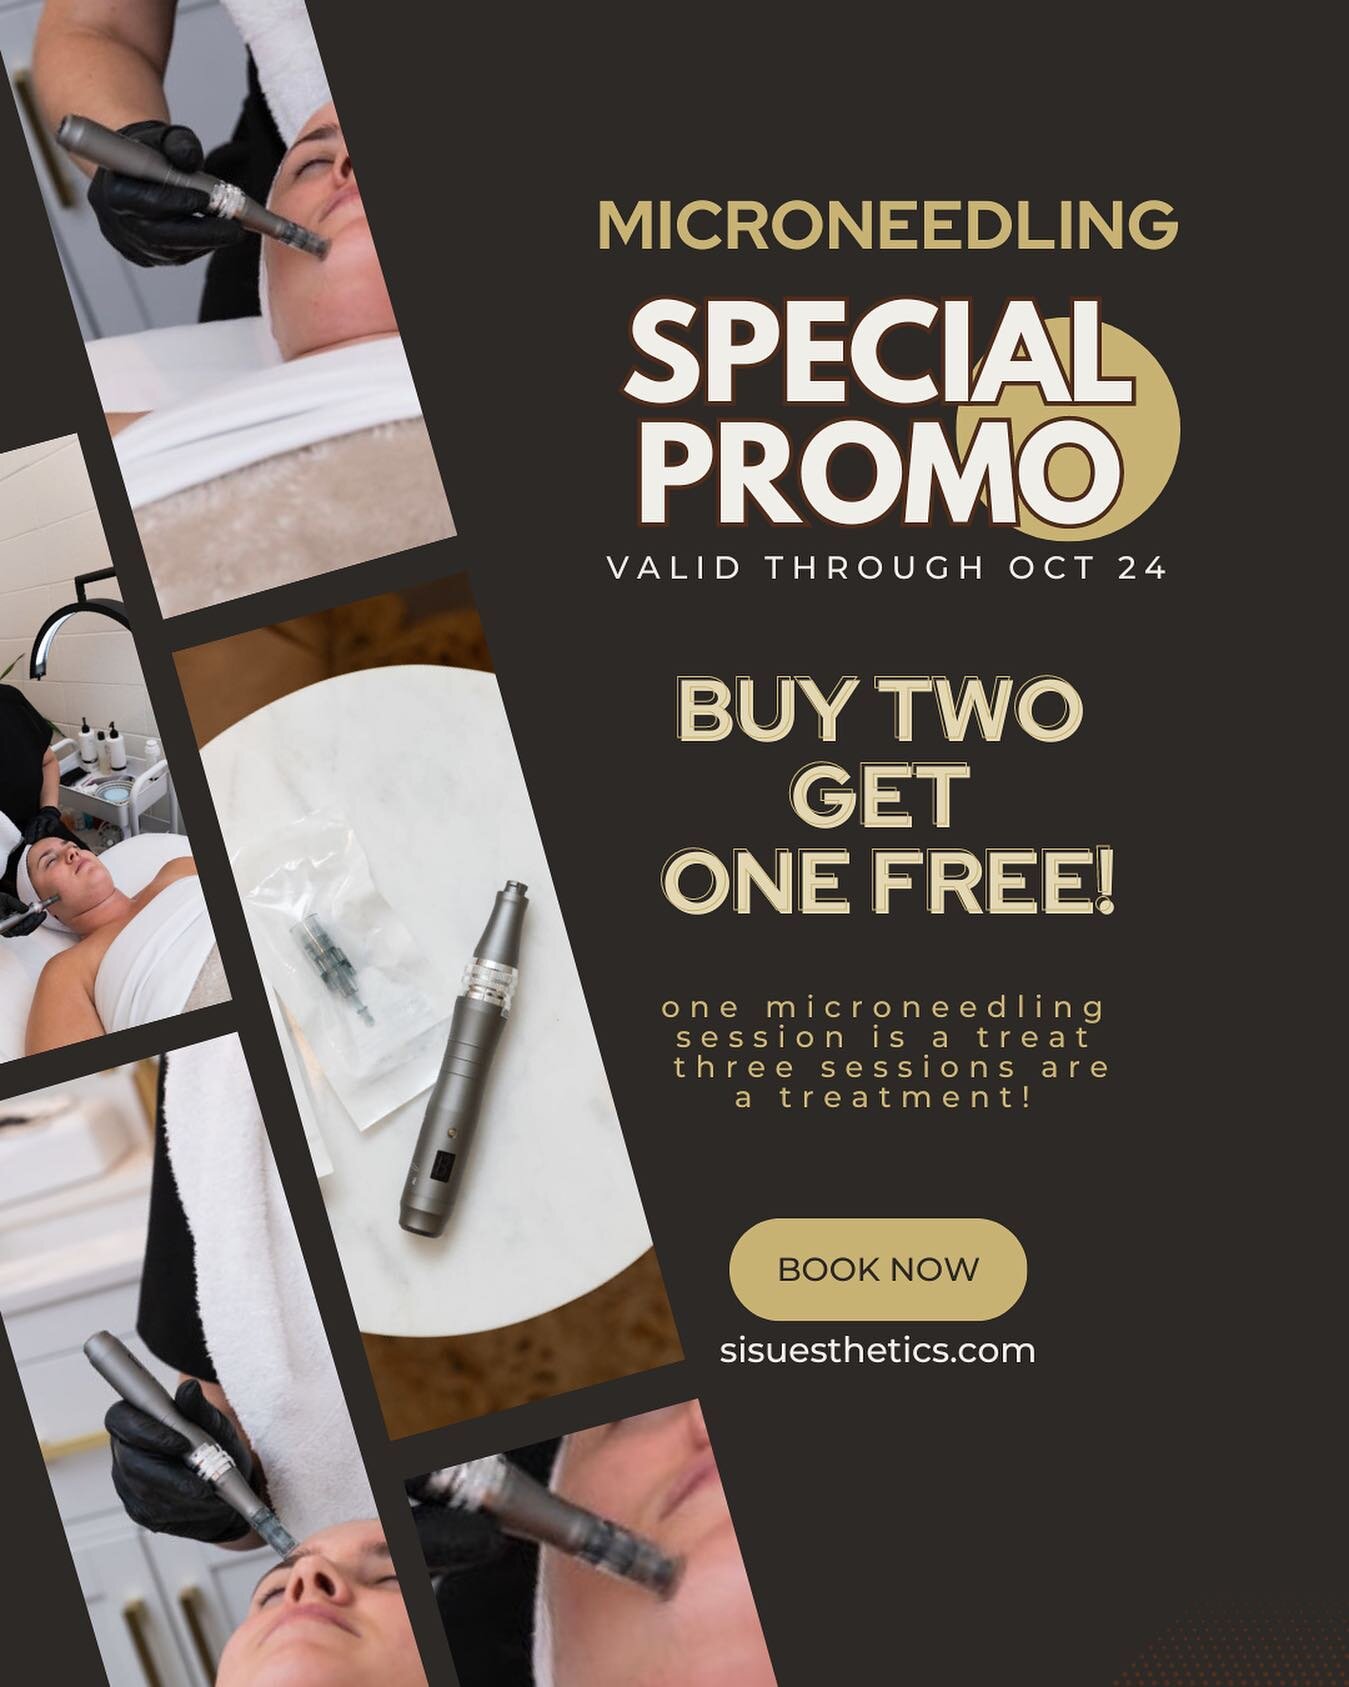 I&rsquo;m excited to announce my fall microneedling special - BUY TWO SESSIONS, GET ONE FREE; up to $300 in savings. 

Microneedling was my most popular advanced service last fall, and I was frequently asked about it during facials over the summer. F